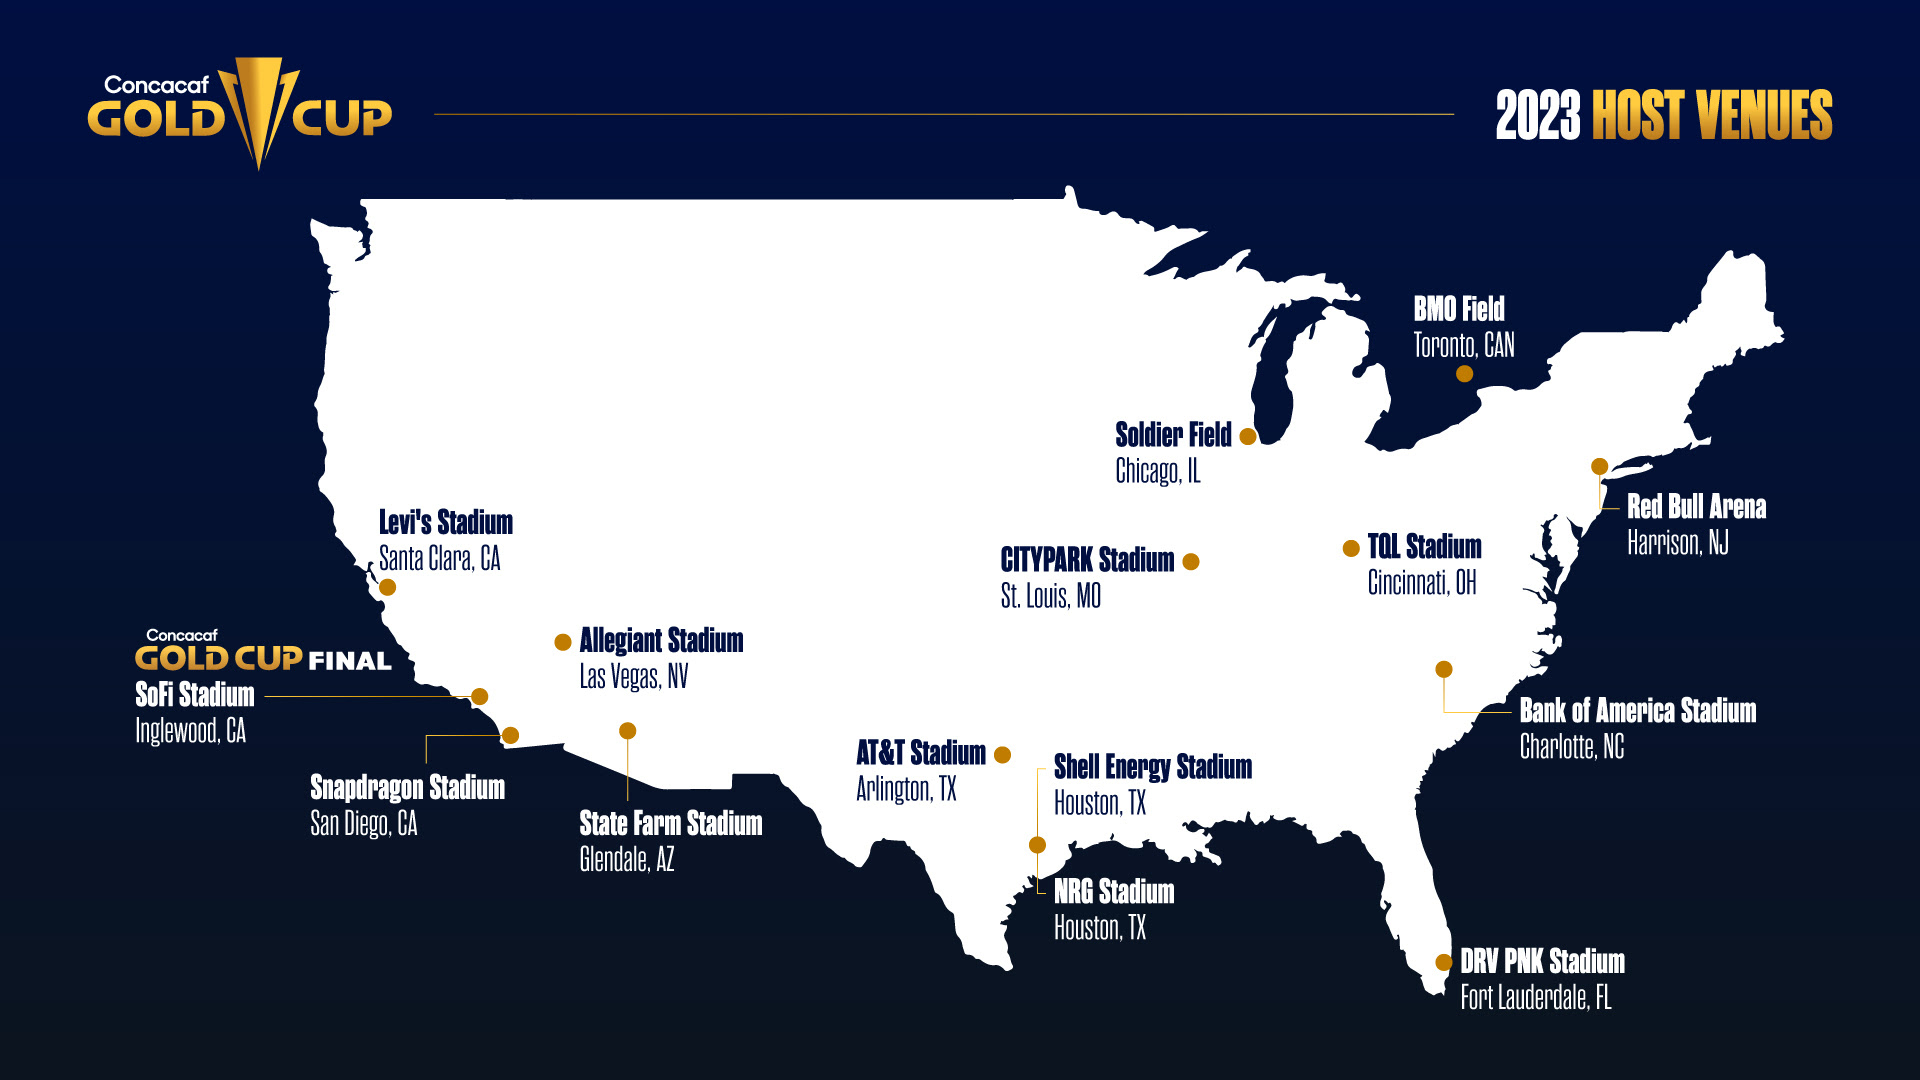 2023 Gold Cup stadiums revealed, including 4 new venues